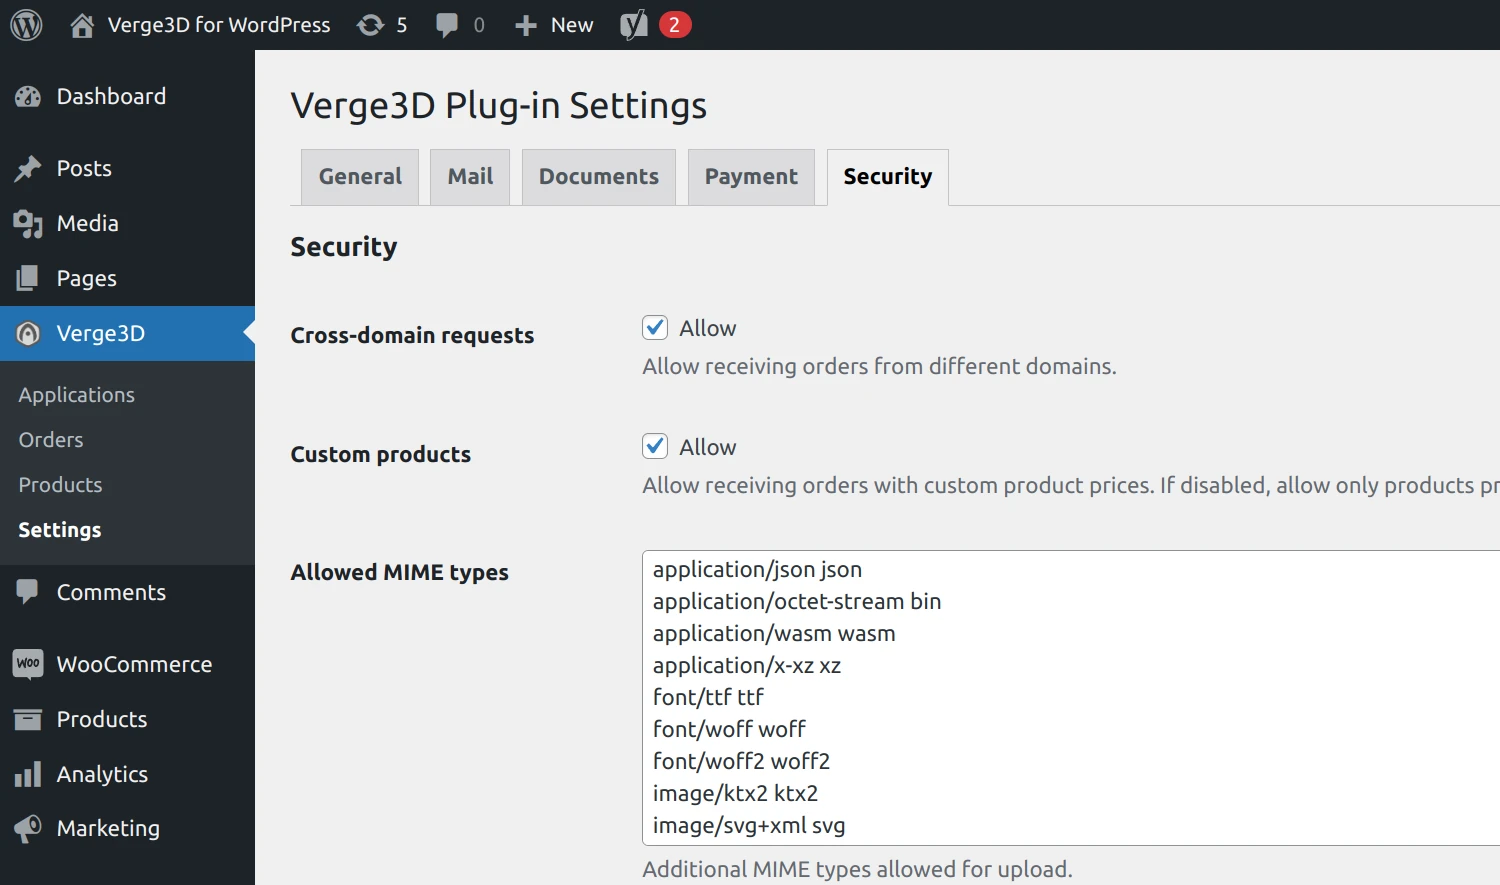 Verge3D for 3ds Max and Maya: wordpress plugin allowed mime types